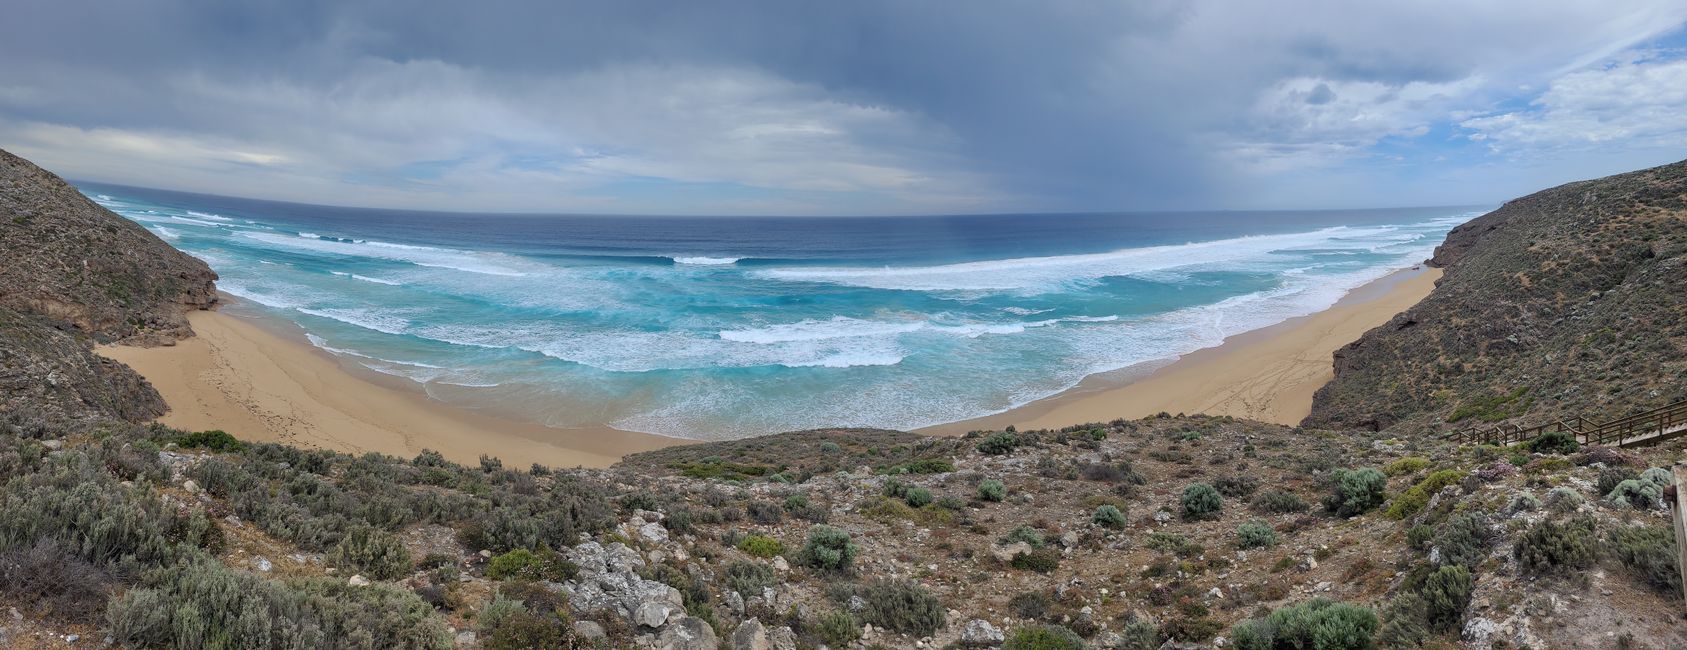 Day 153 To Coffin Bay National Park